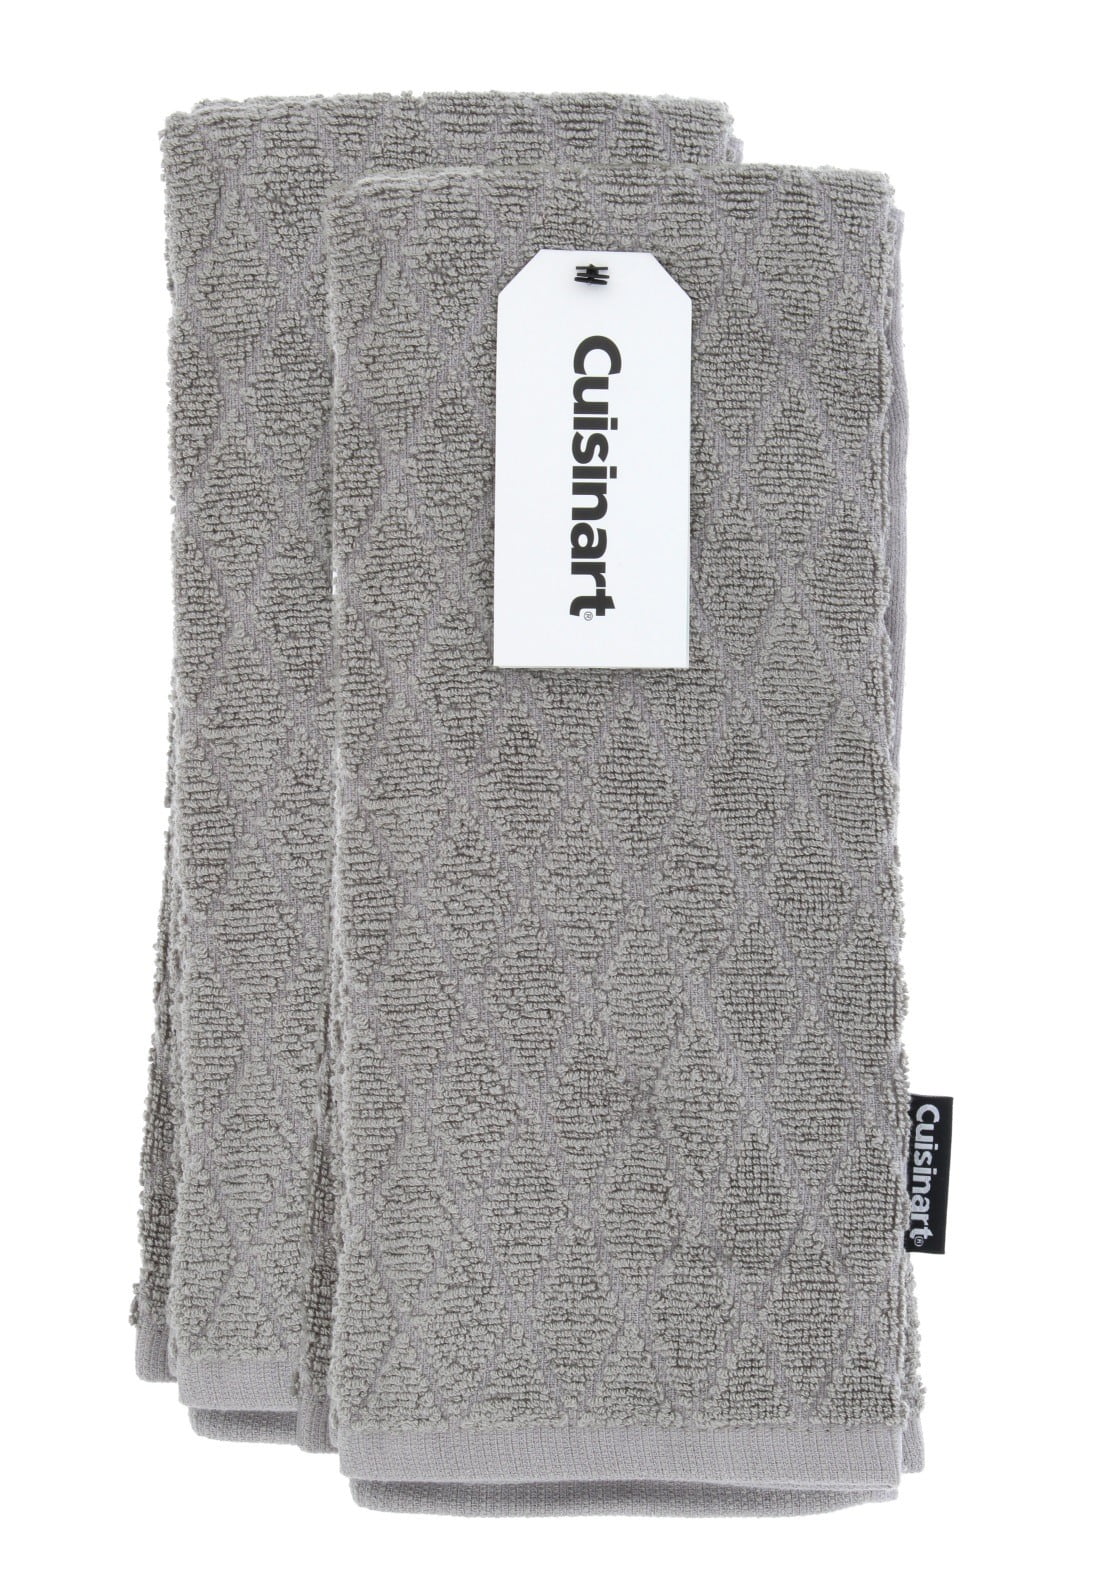 Absorbent Kitchen Towel Cuisinart Cotton Chef’s Towel w/Embroidery Tan 2pk 